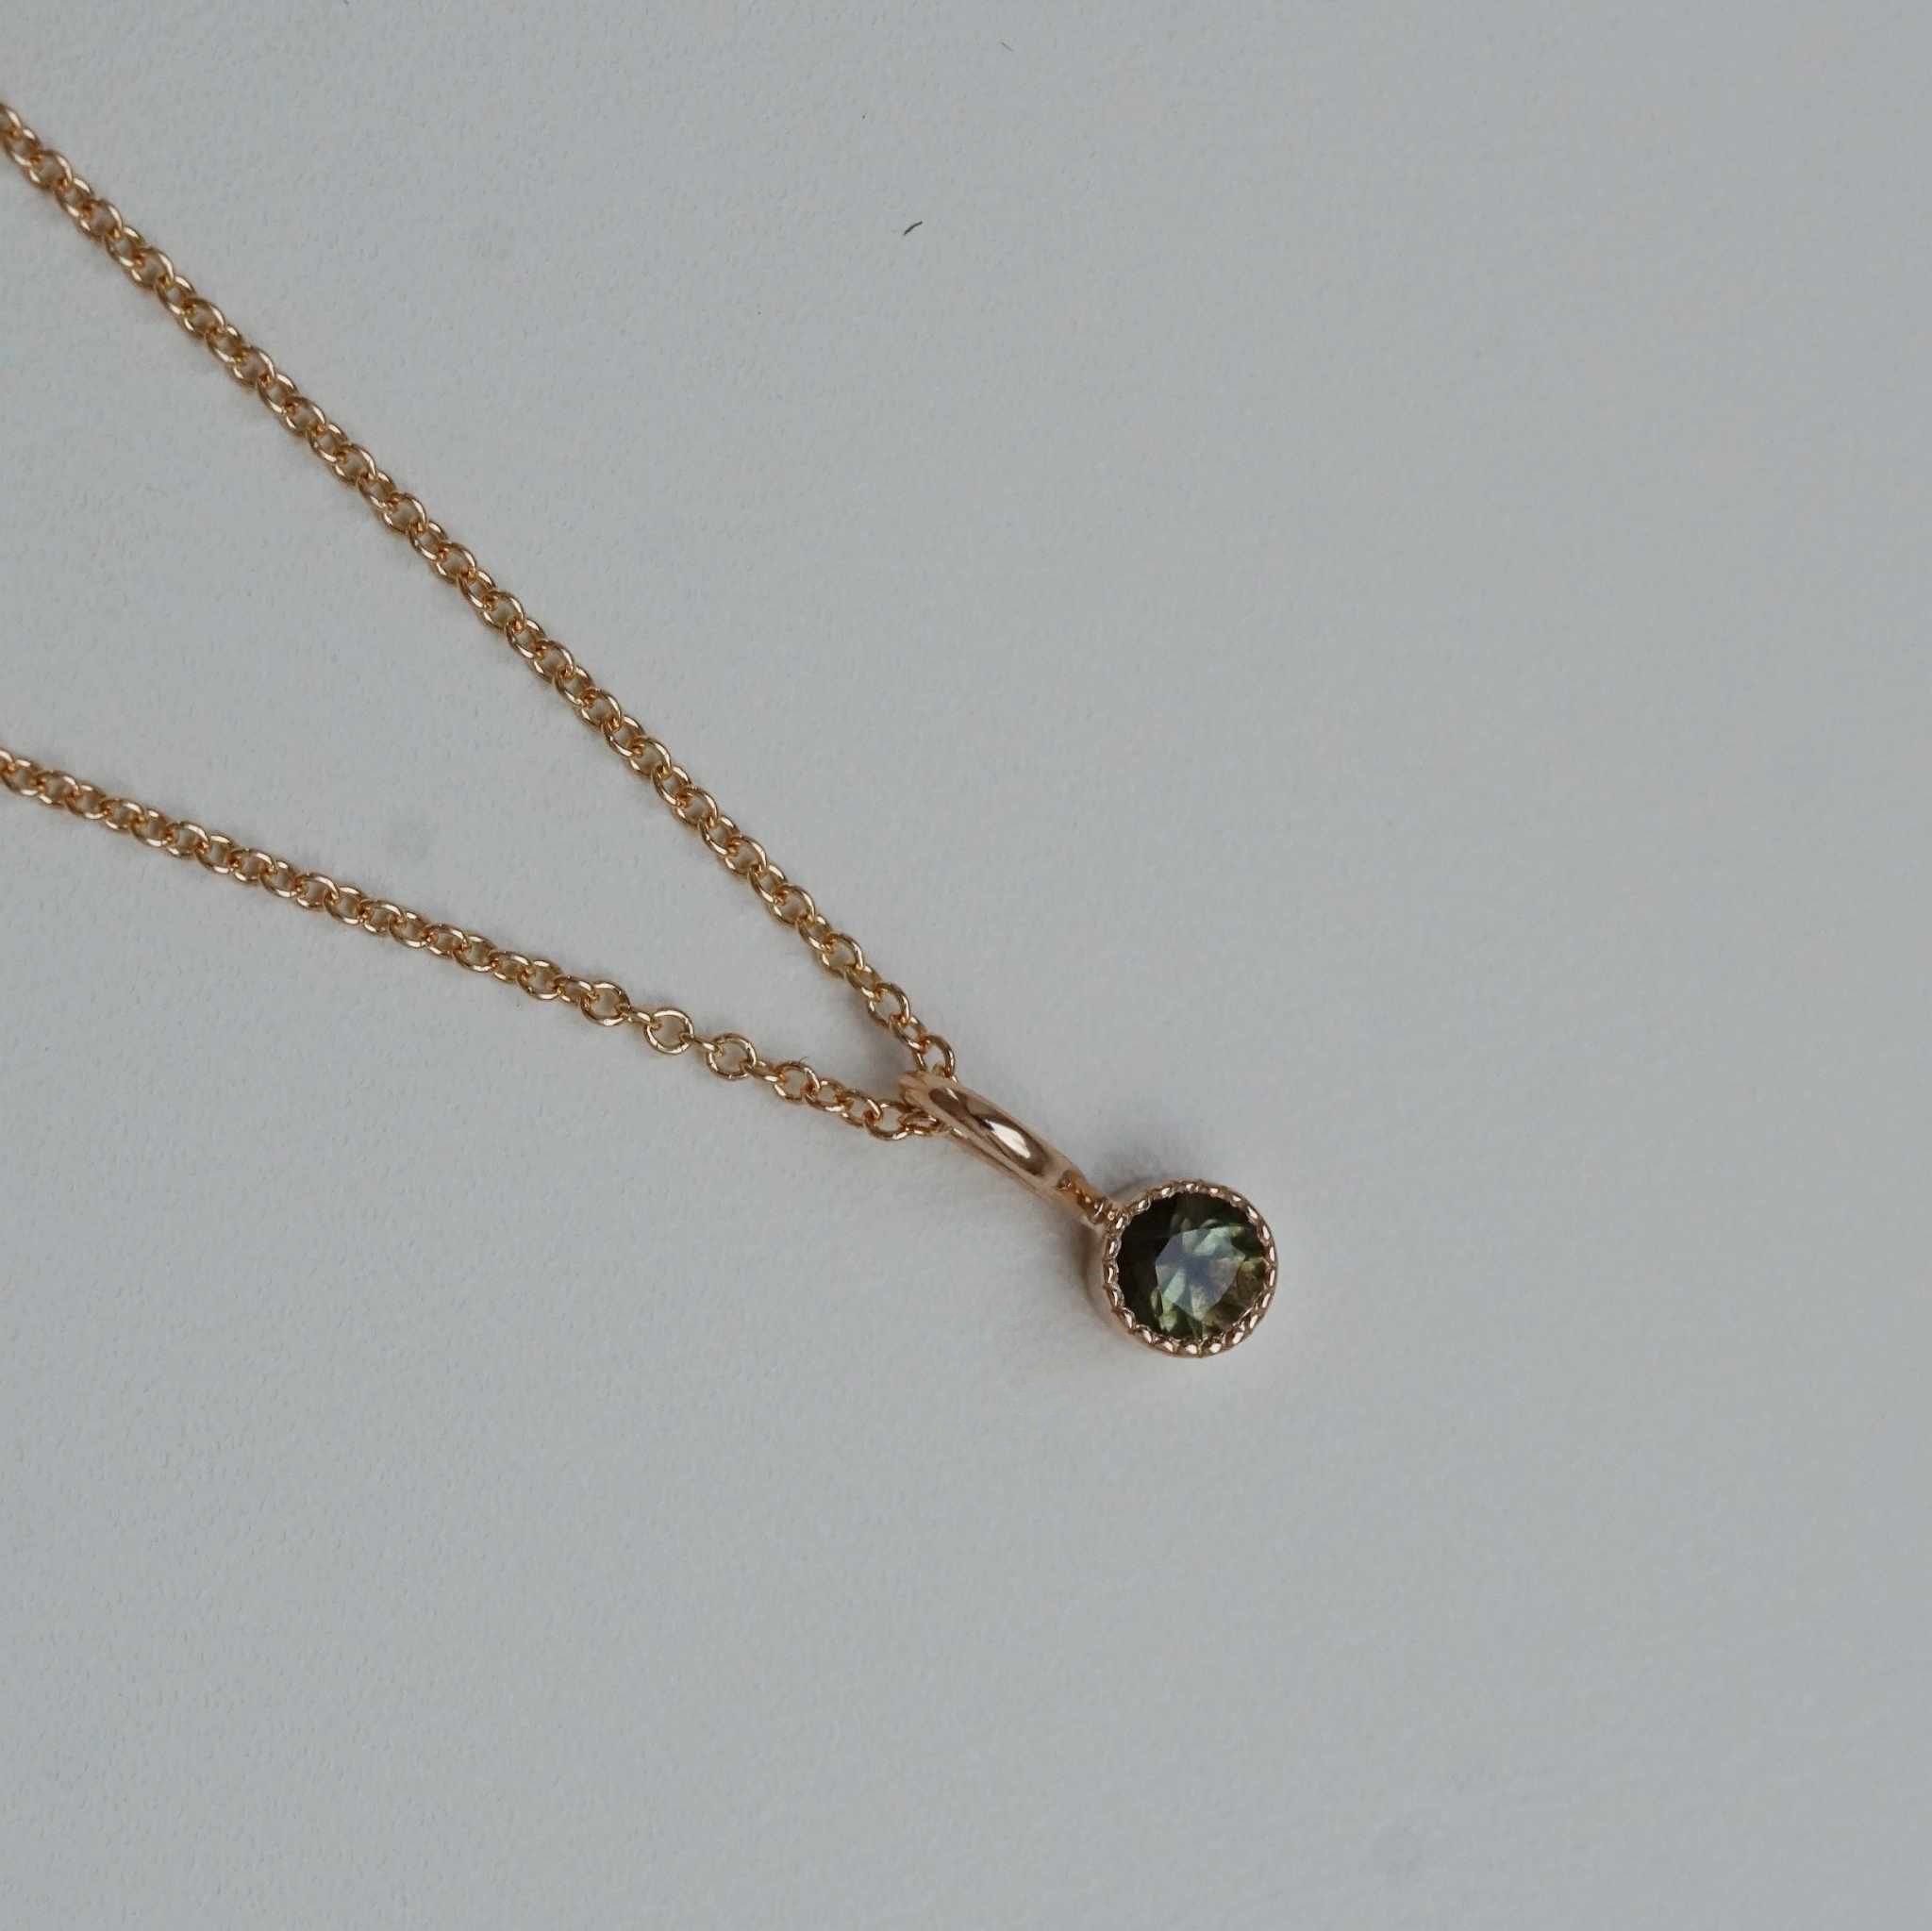 "Twinkle" pendant in gold with a greenbrown sapphire